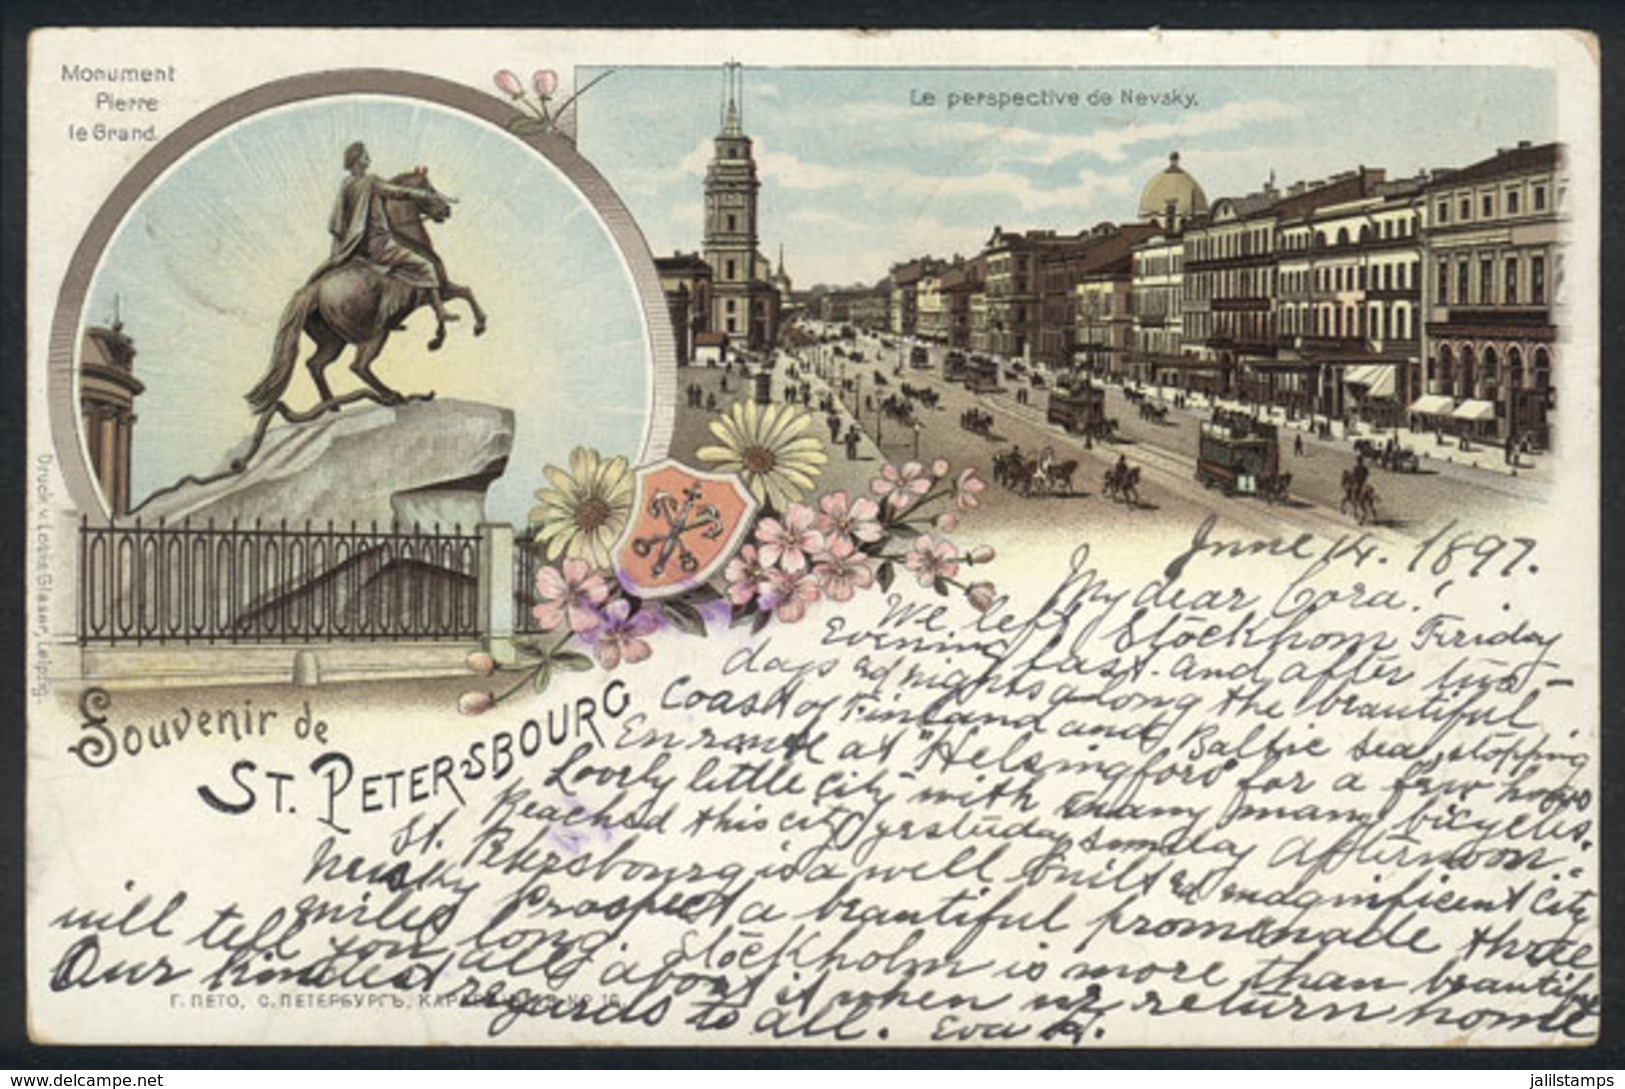 RUSSIA: ST.PETERSBOURG: View Of The Nevsky Avenue And Monument, Old Postcard Dated In 1897, Fine Quality! - Russia